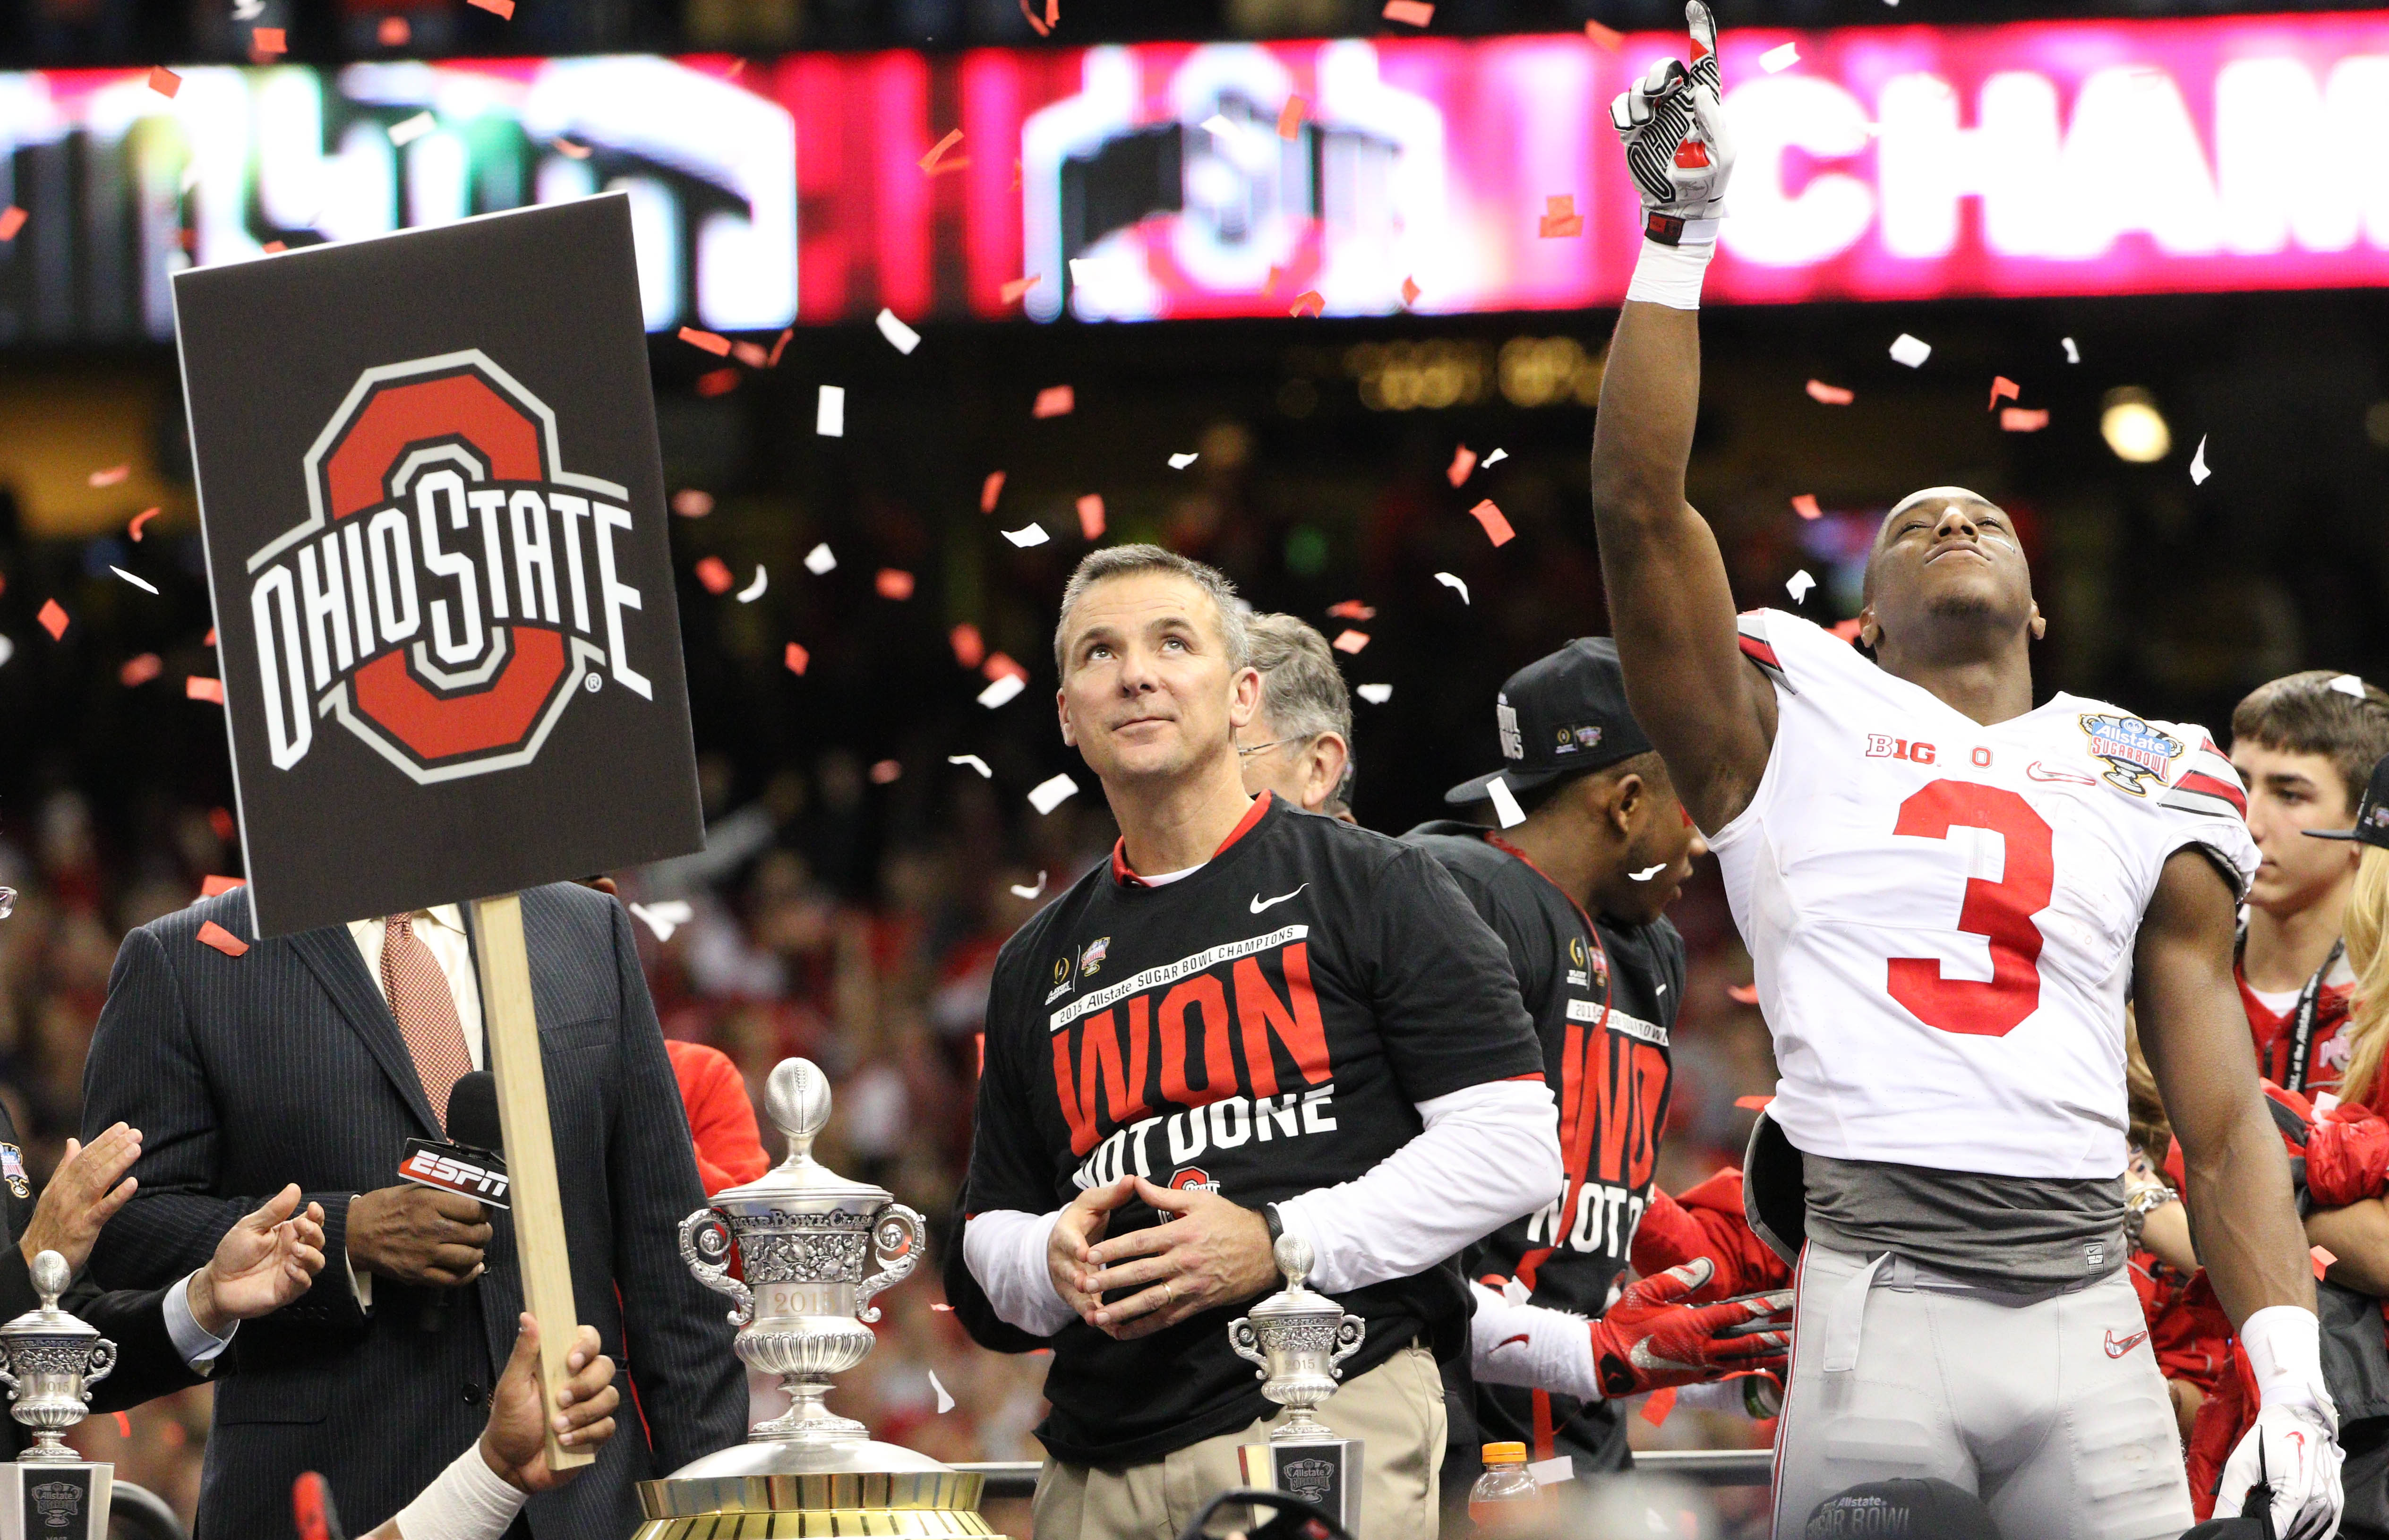 Ohio State's journey continues after memorable Sugar Bowl win Big Ten